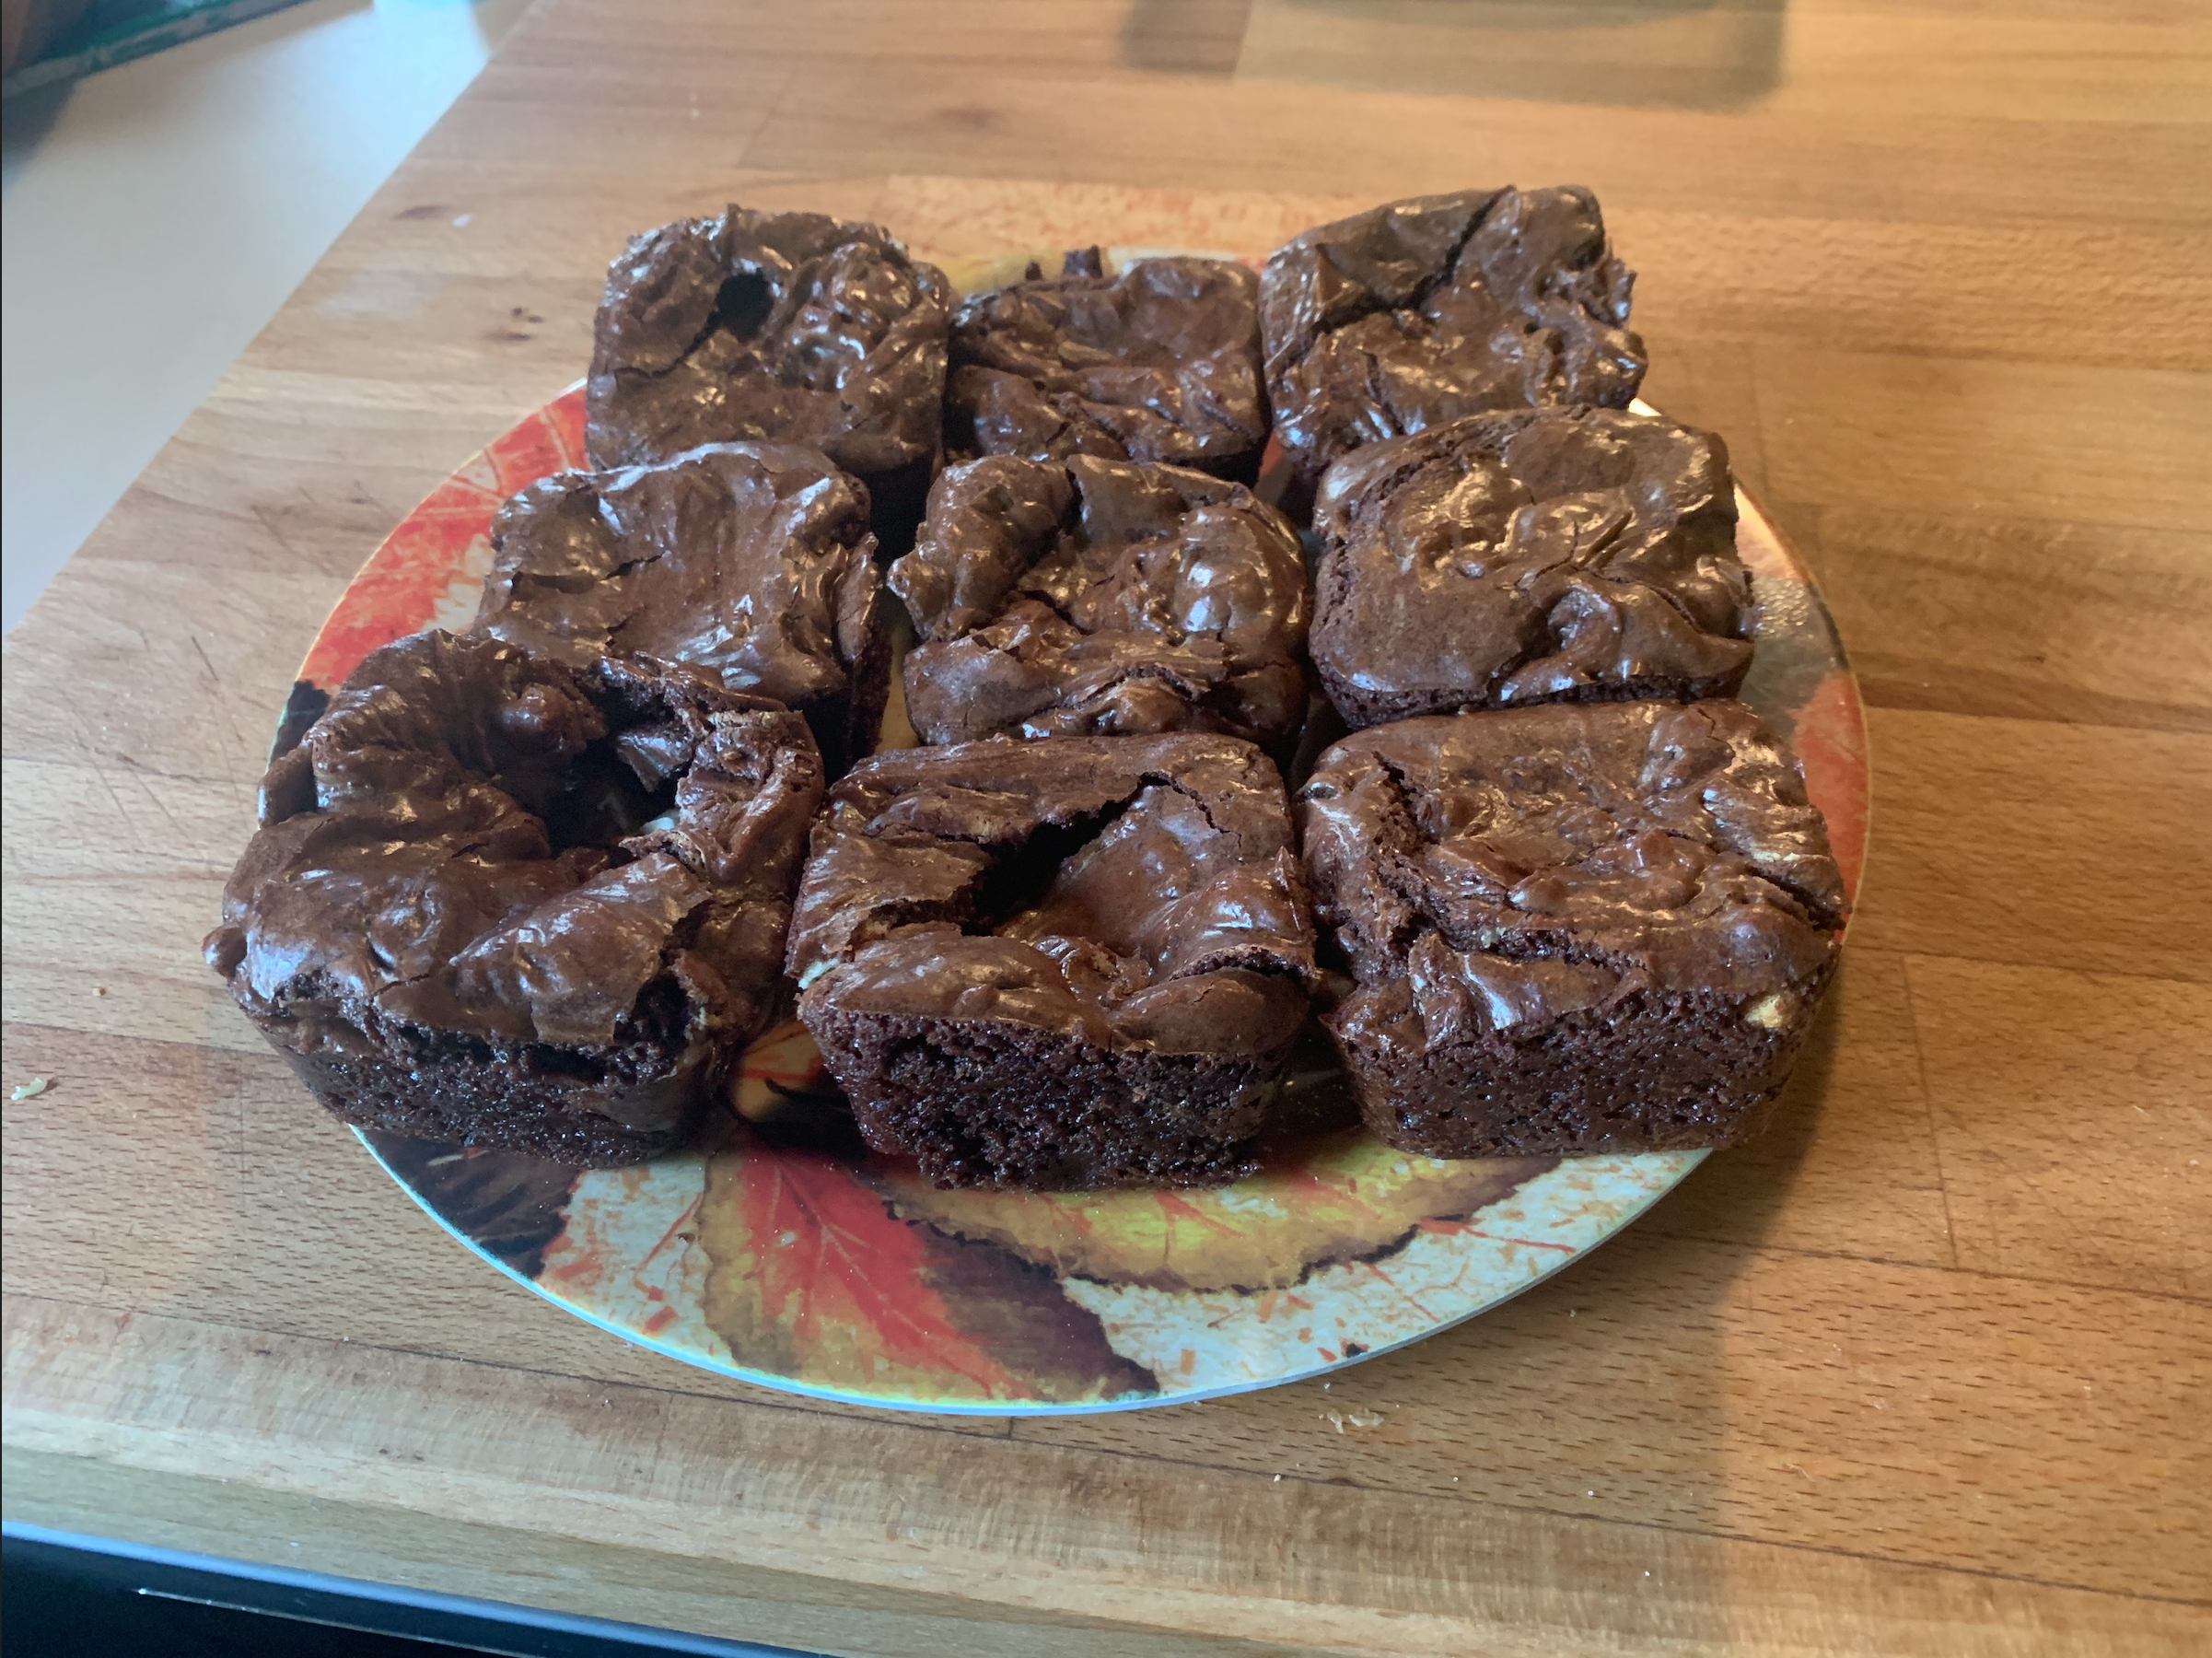 Brownies on a plate.